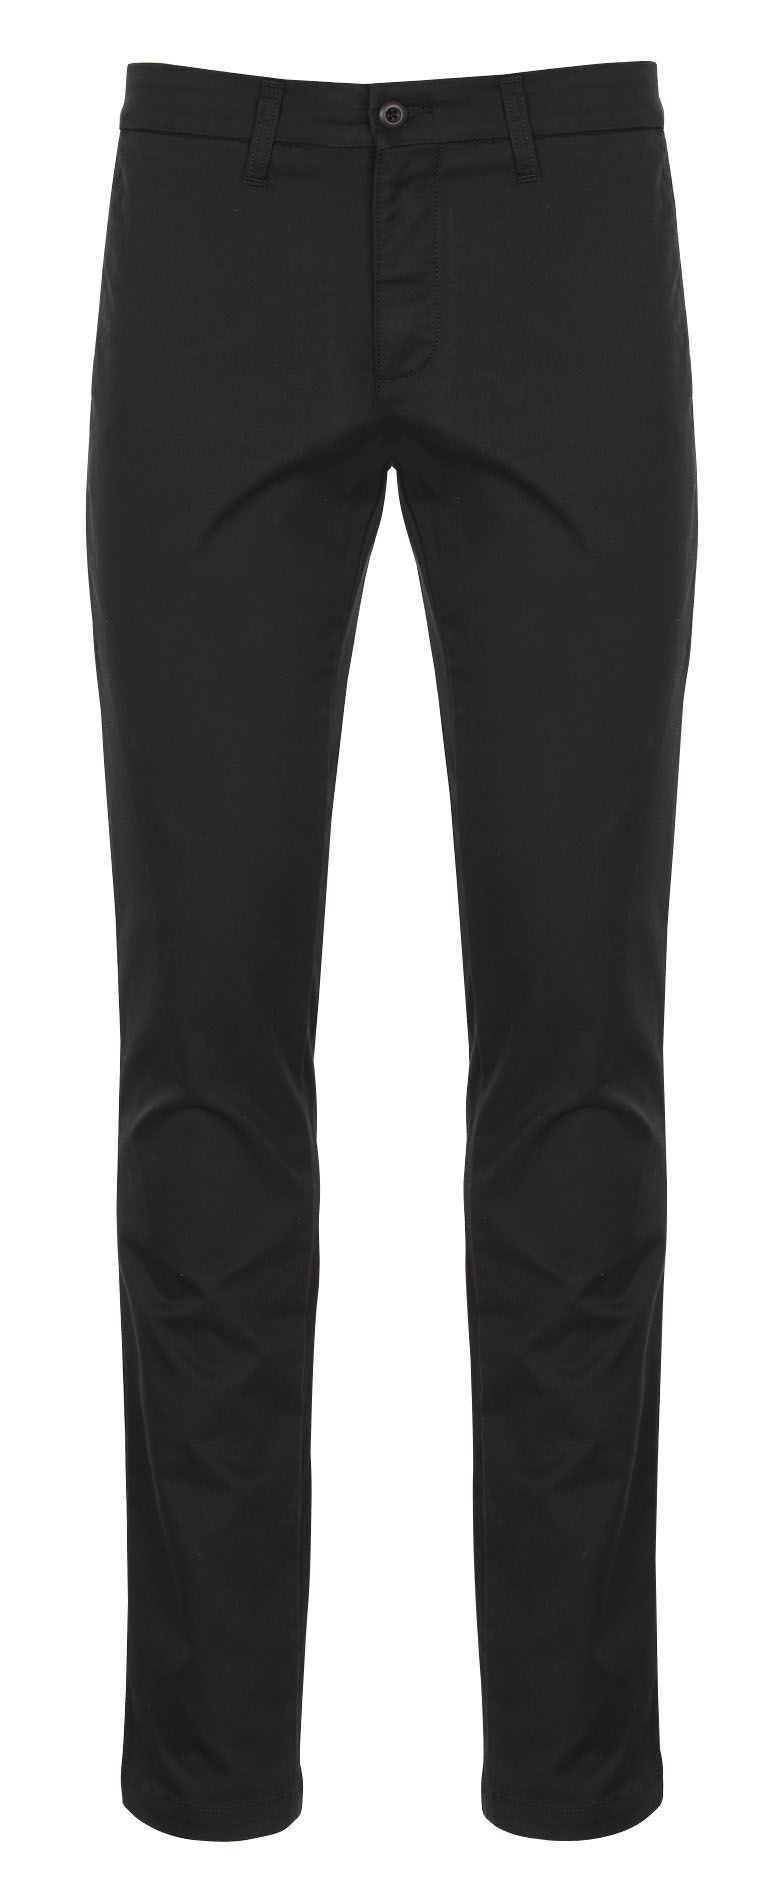 Carhartt WIP Black Organic Cotton Trousers for Men Mens Clothing Trousers Slacks and Chinos Casual trousers and trousers 